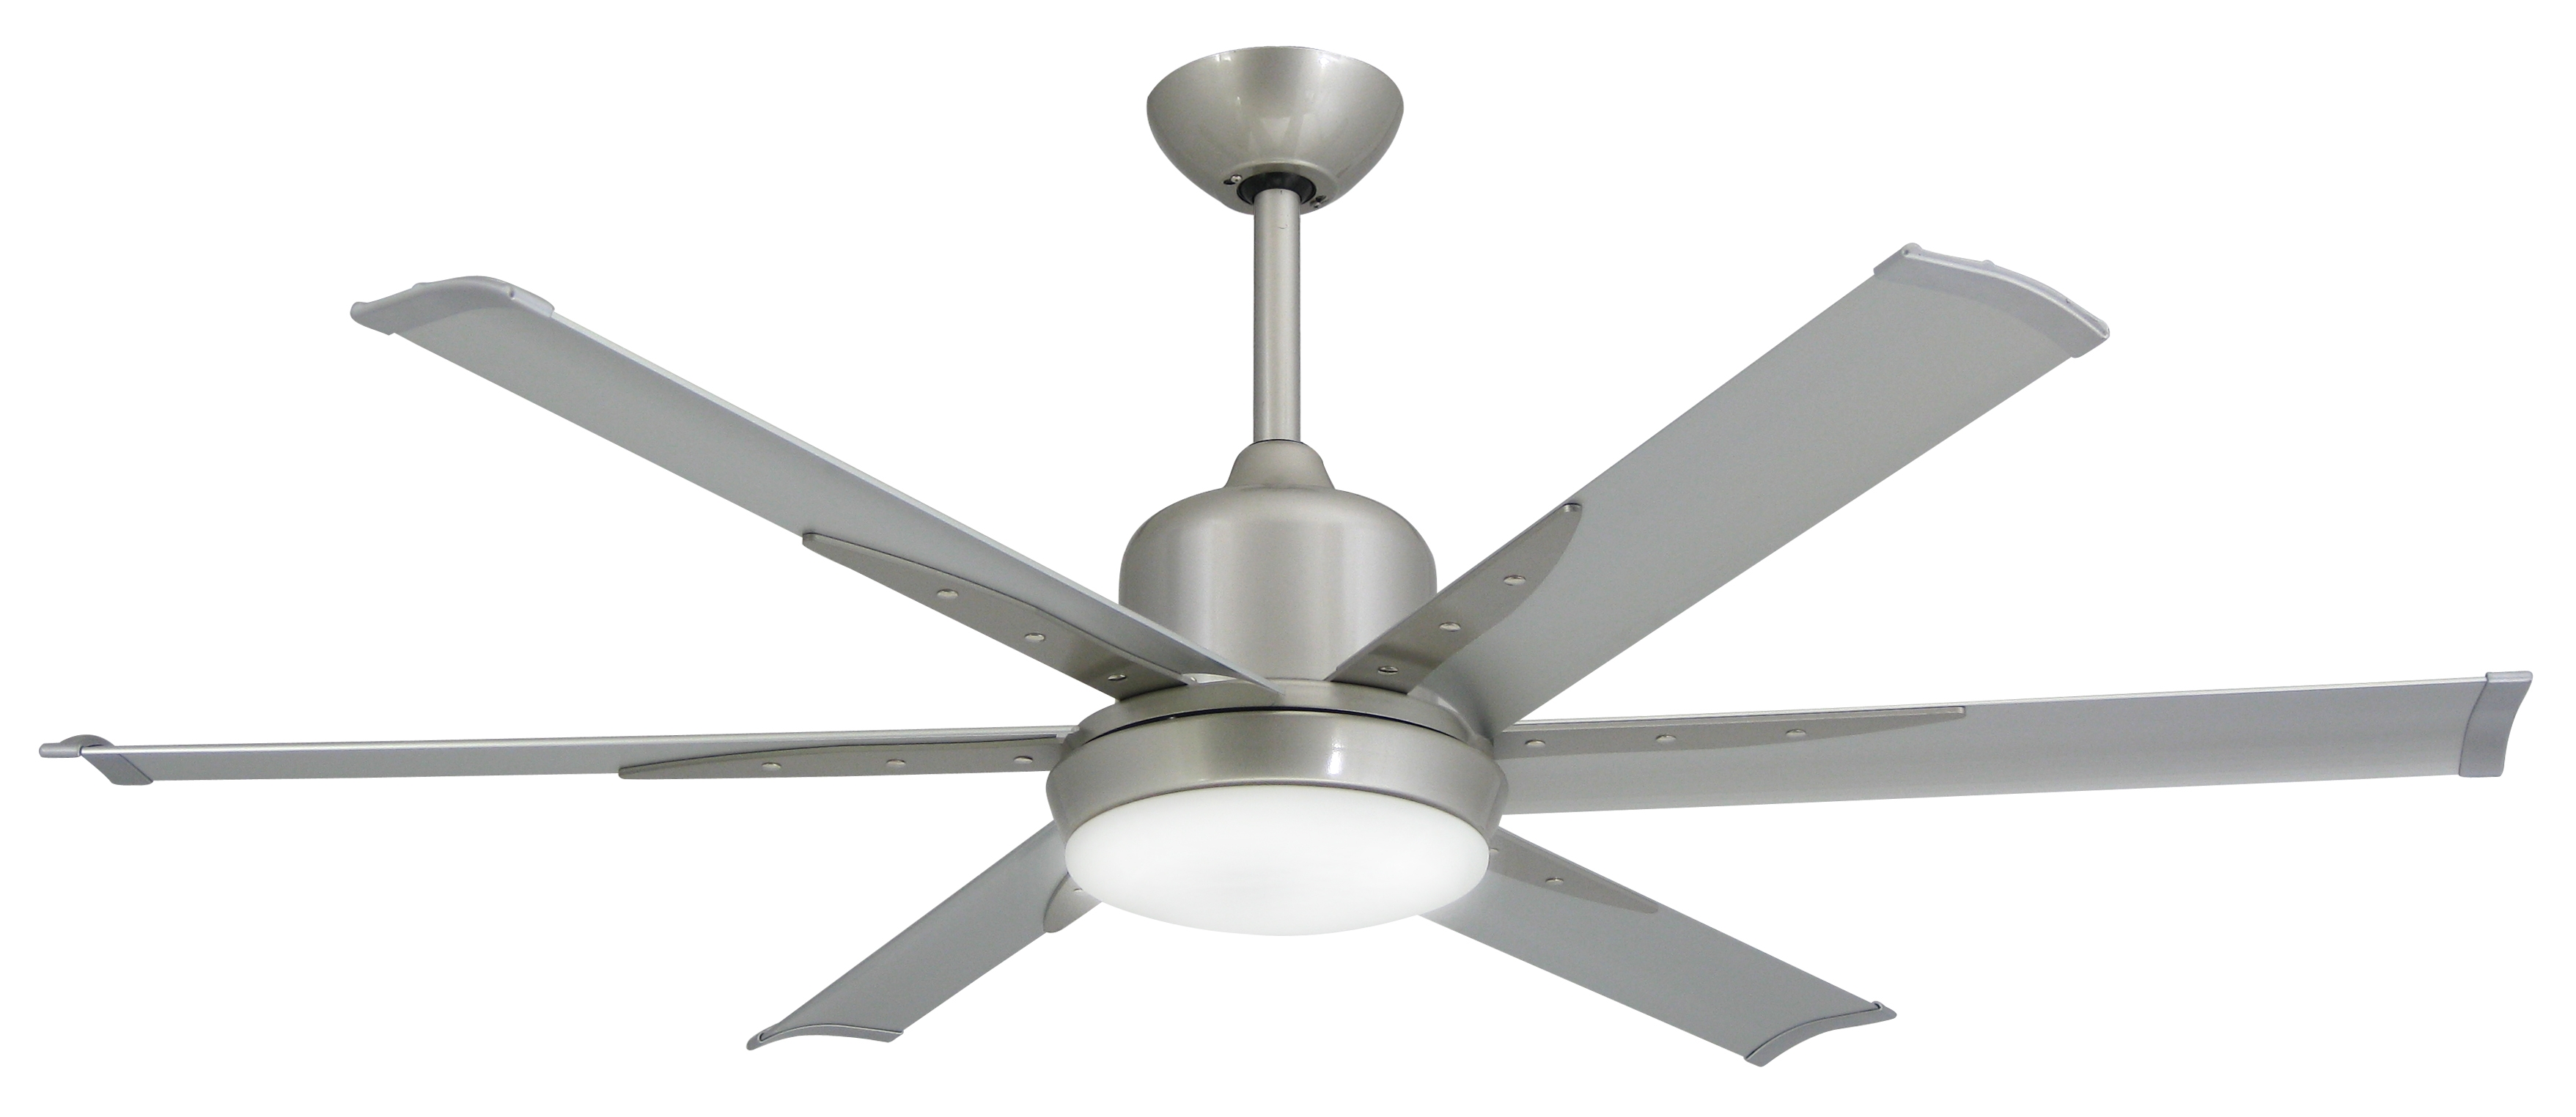 White Industrial Ceiling Fan With Light